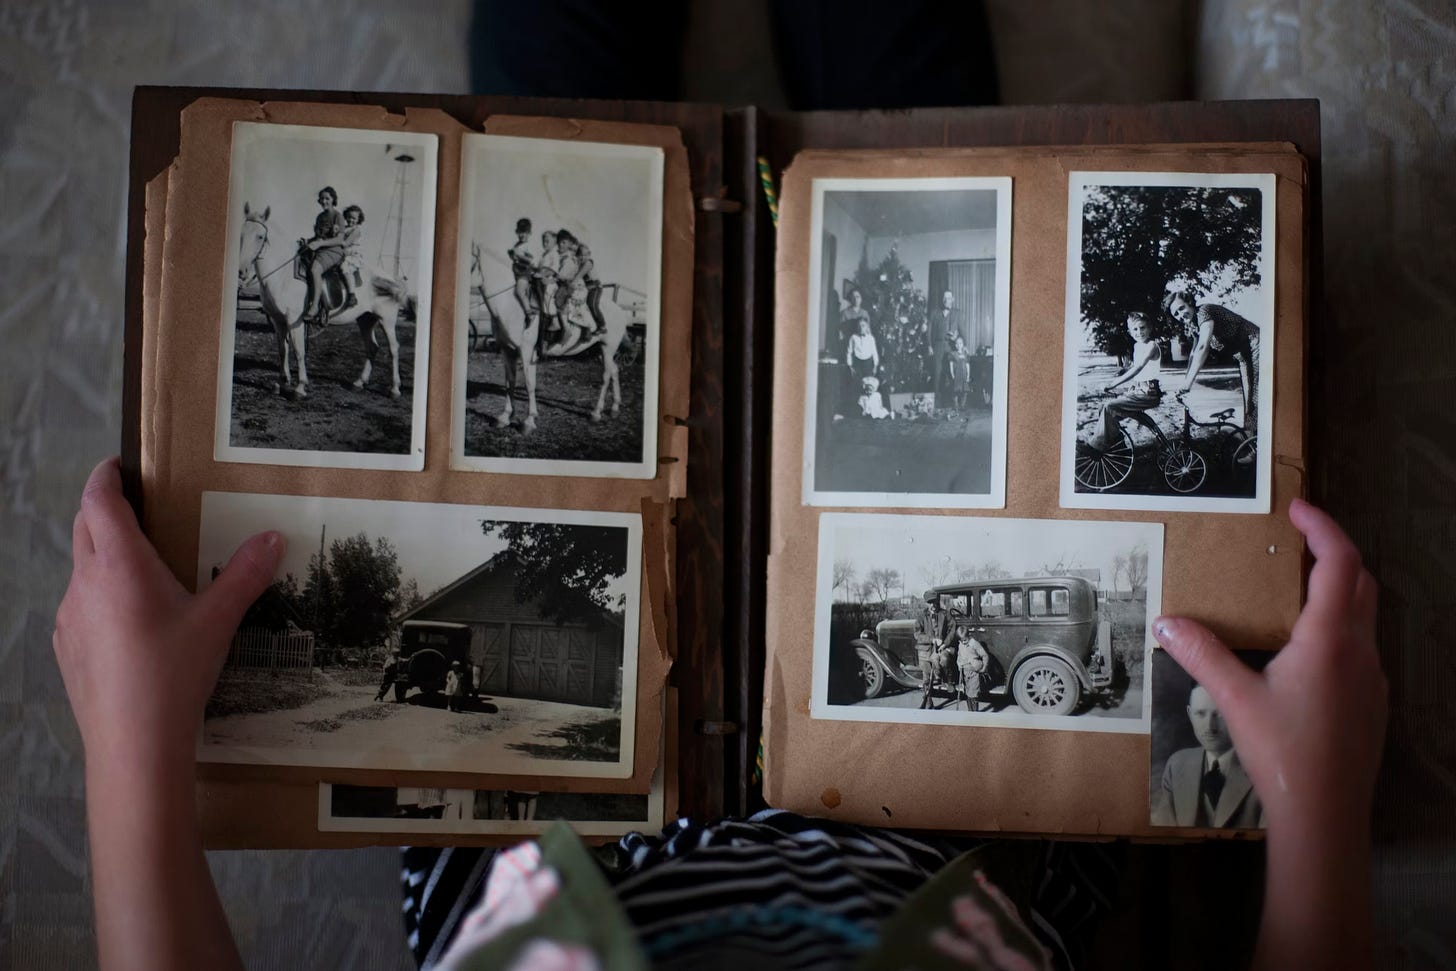 A picture taken from above showing an old photo album held in a child's hands. The album's pages are brown with age and have some stains and tearing around the edges. The photos featured show people on horses and and old-fashioned bicycles and also next to an odl-fashioned car, probably made in the 1930s. One also features a family around a Christmas tree.